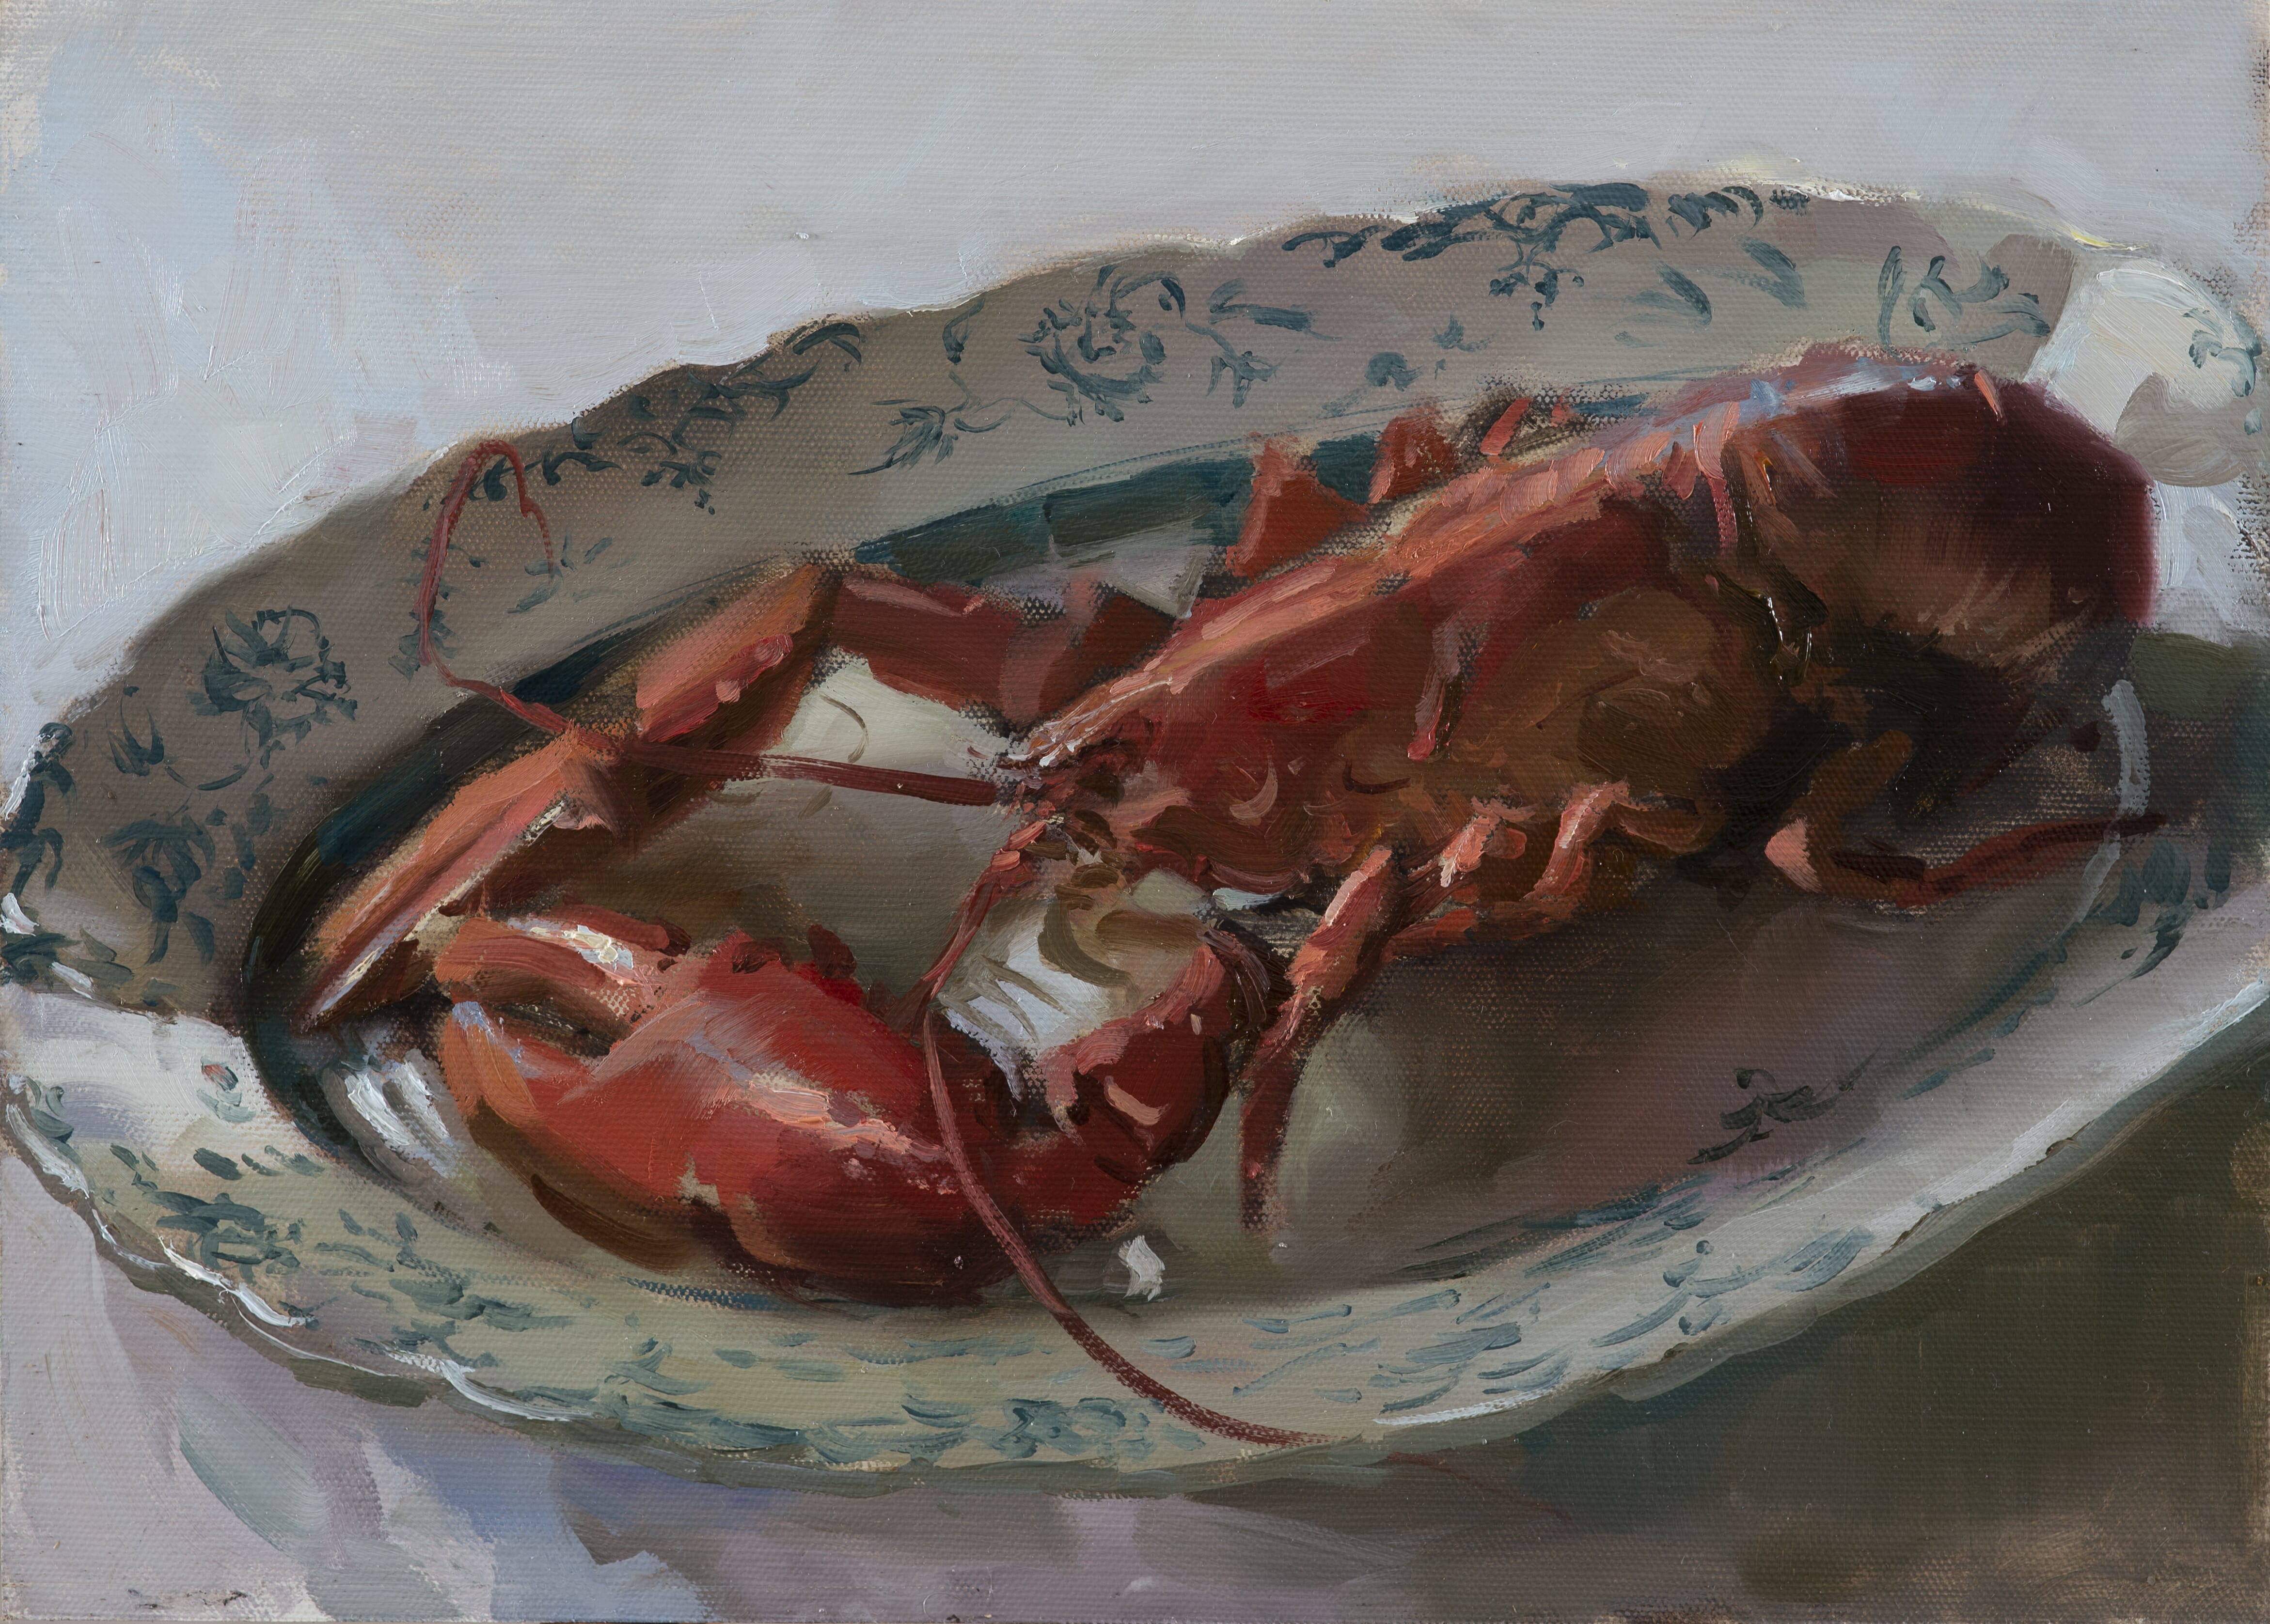  Lobster on China Dish